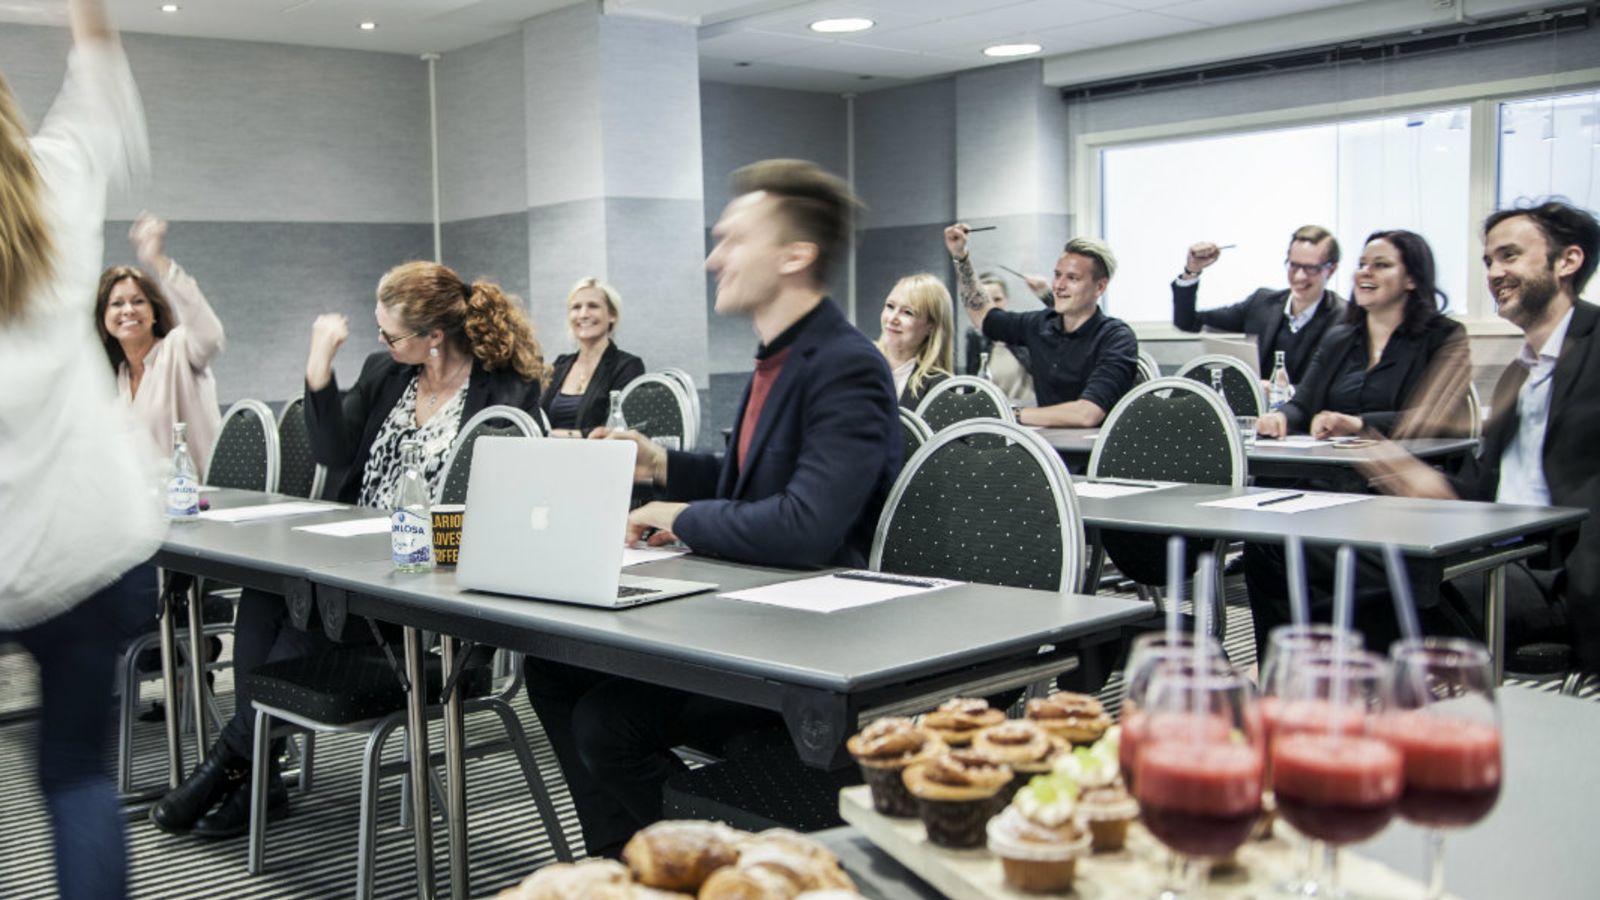 Conference-clarion-grand-hotel-helsingborg-featured.jpg